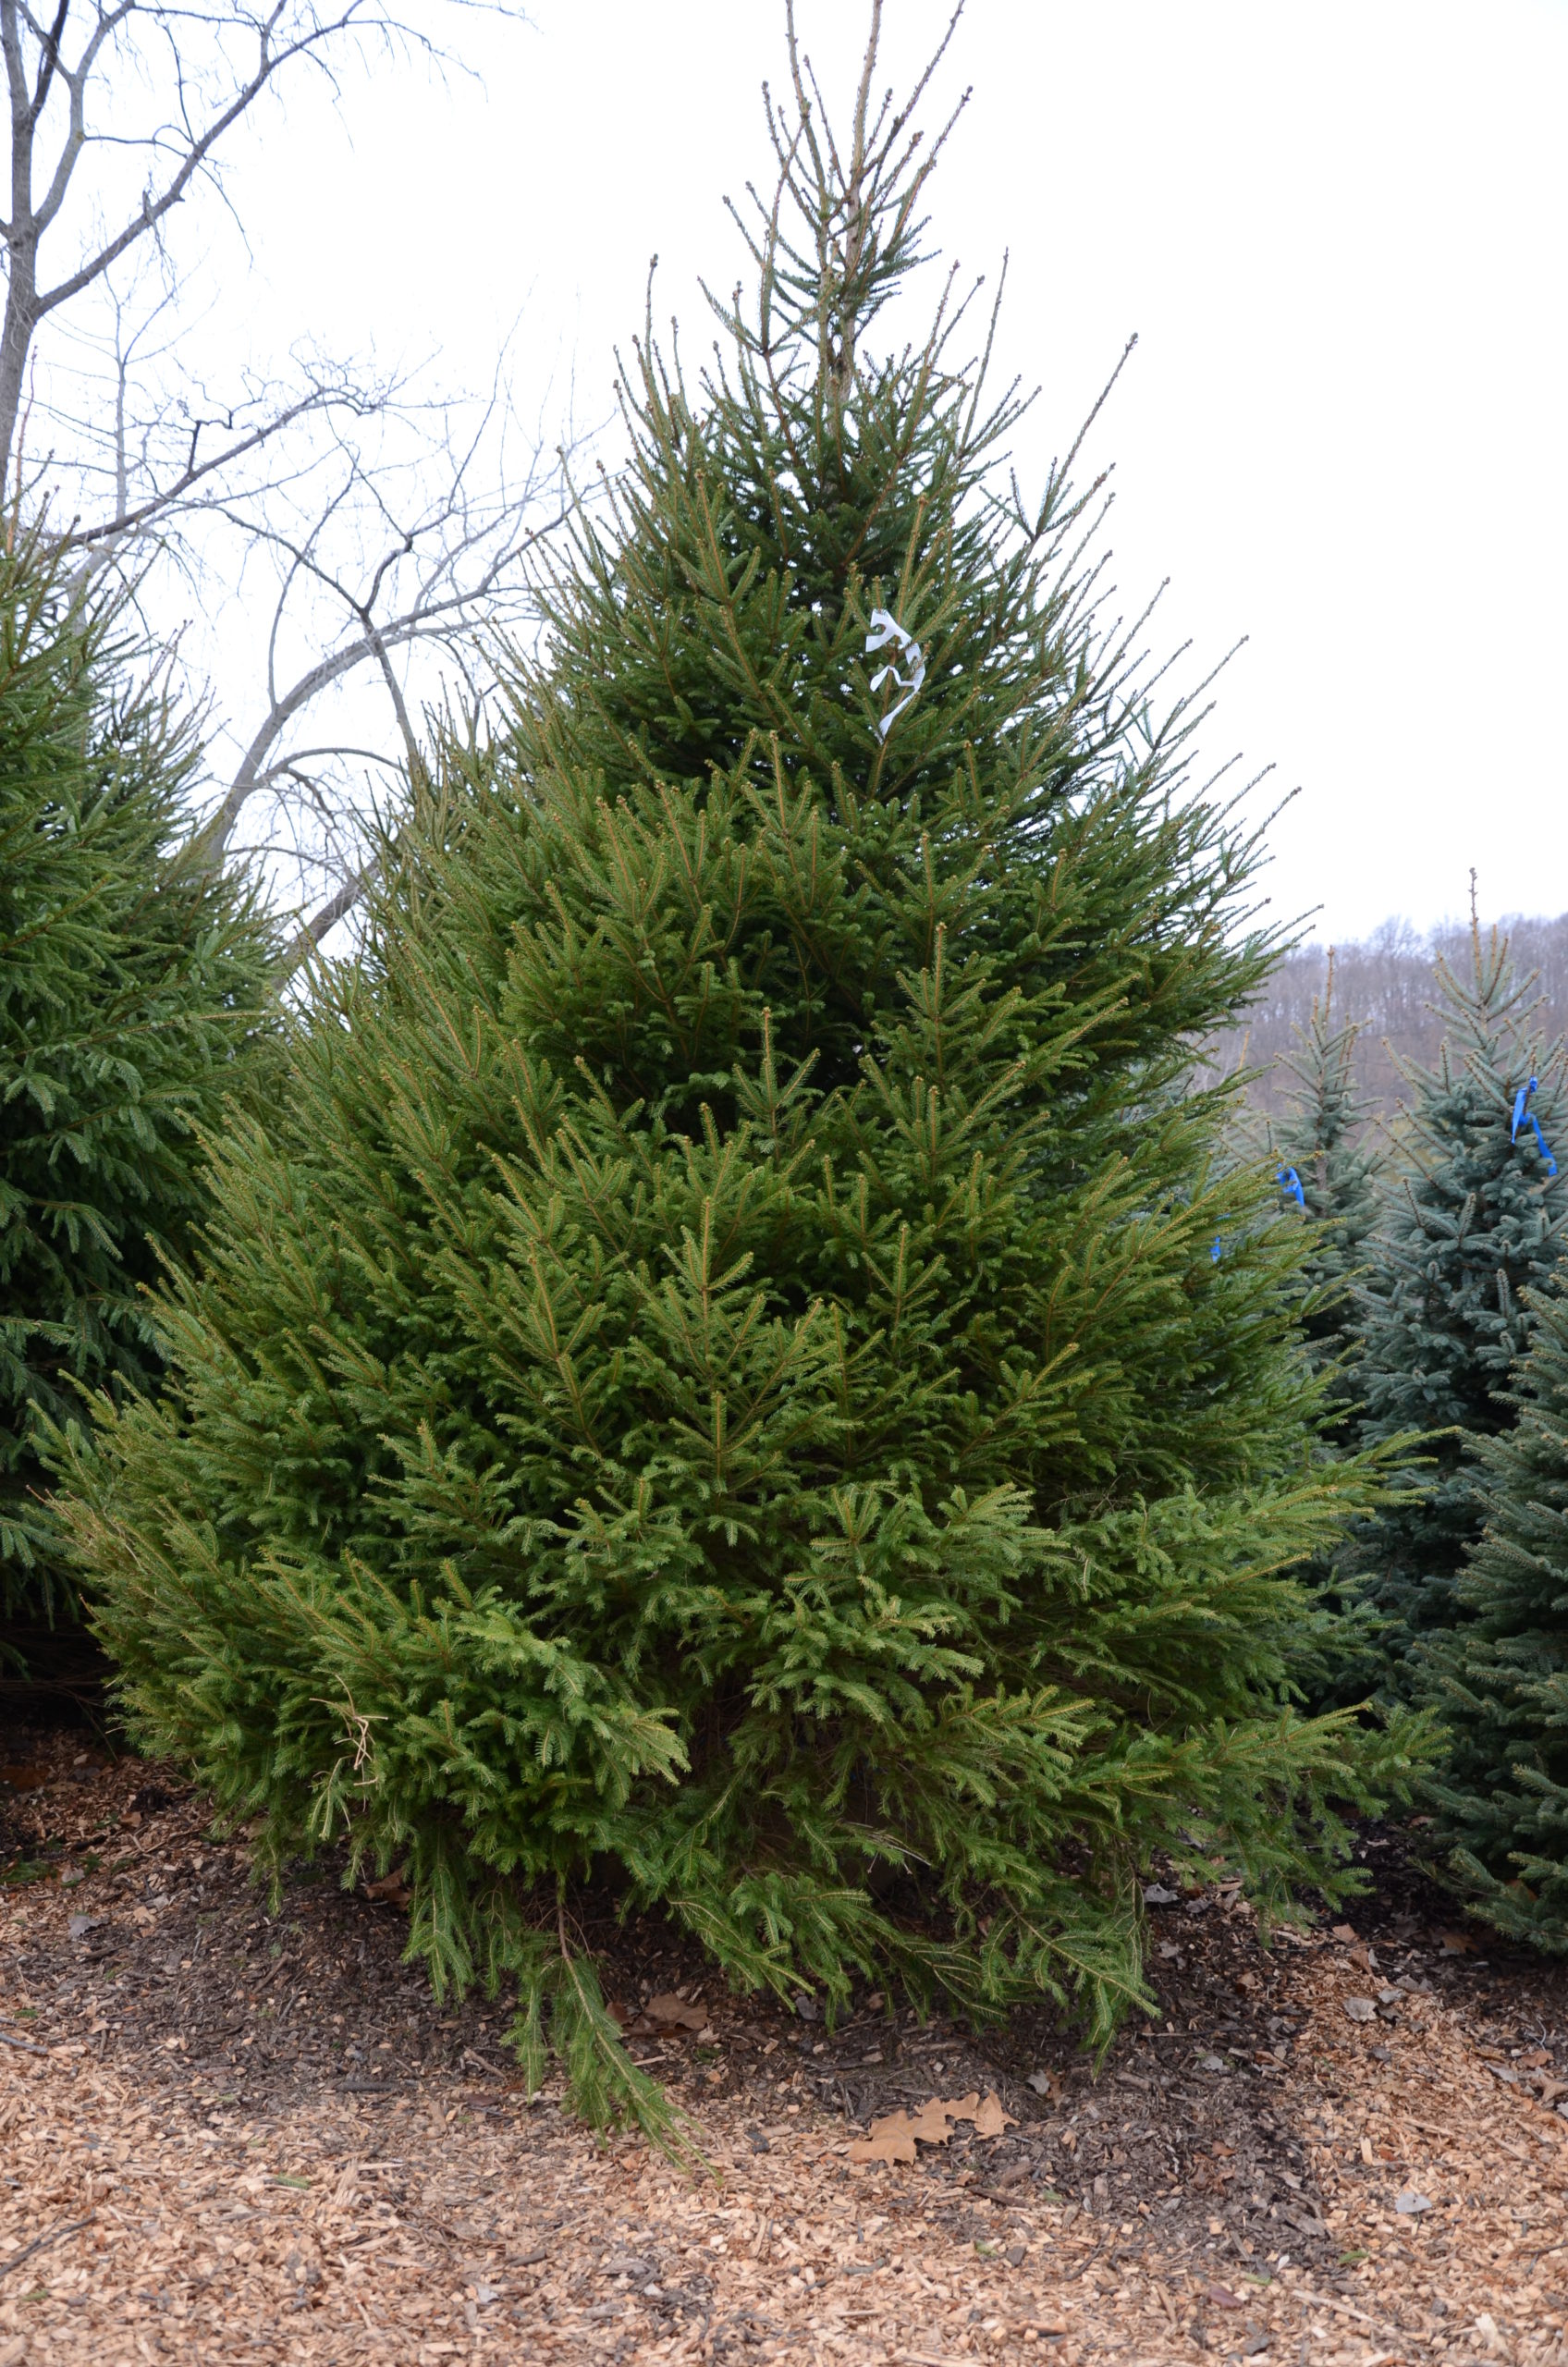 Fraser fir. This fir has a somewhat open habit, making it a good choice for lots of decorations and ornaments.